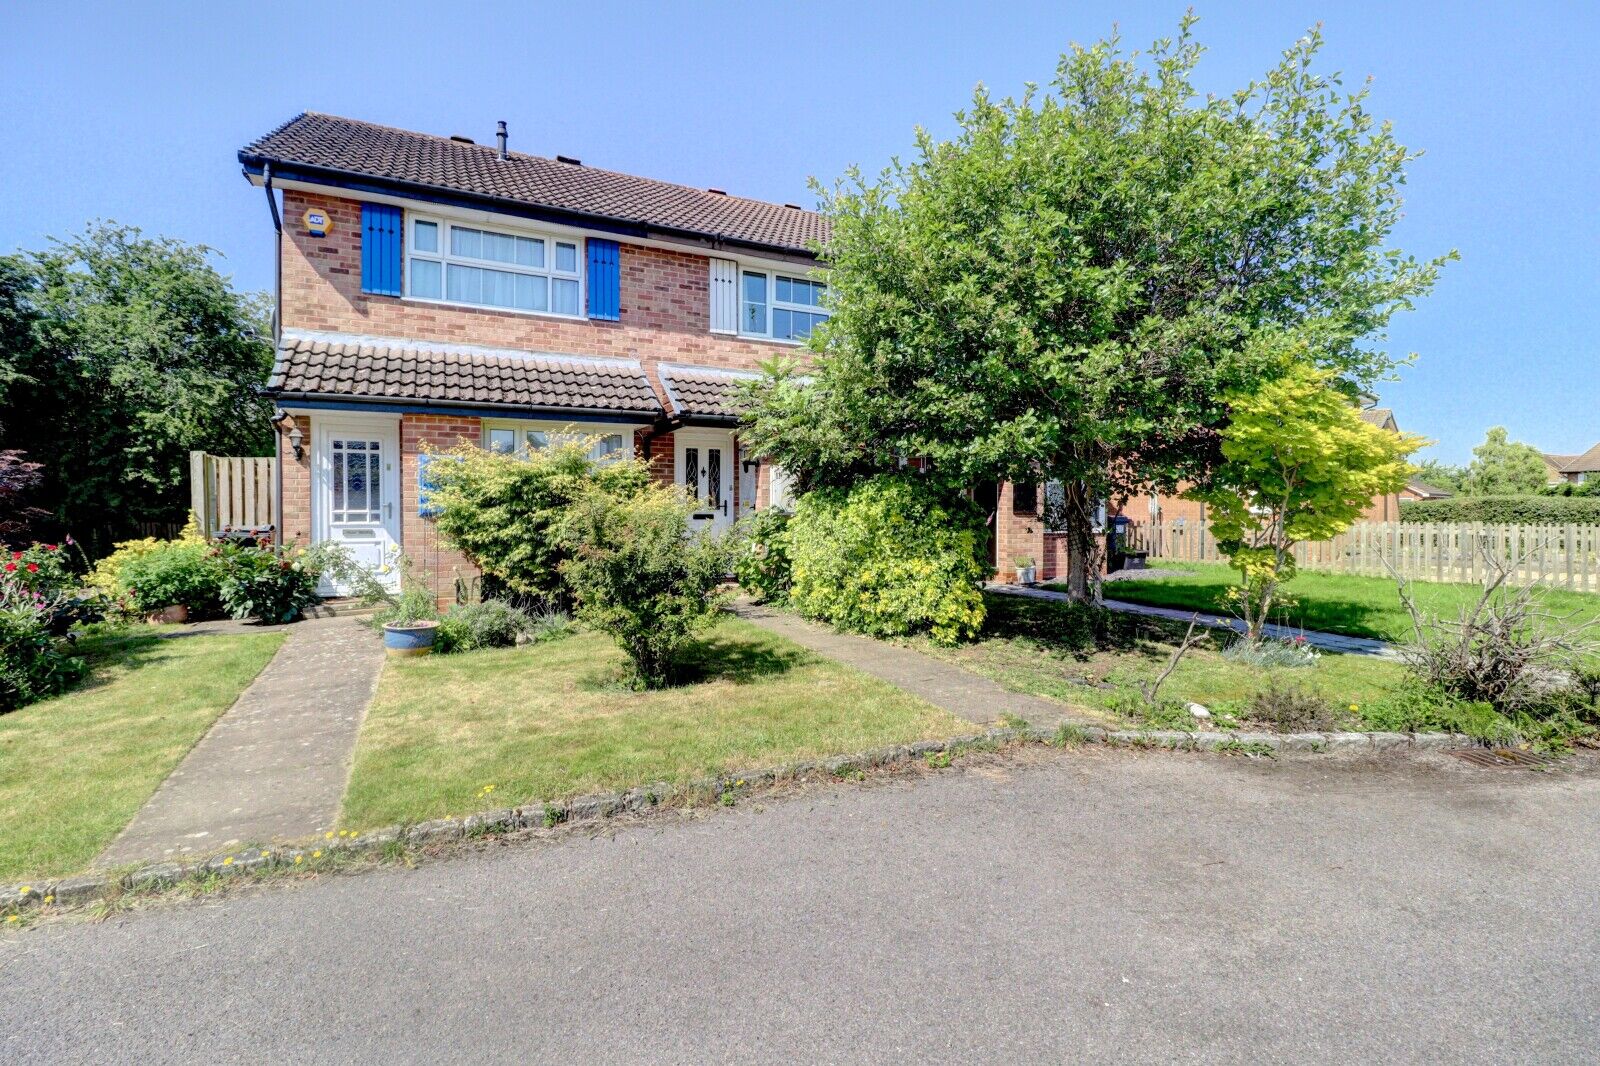 2 bedroom mid terraced house for sale Parsons Walk, Holmer Green, HP15, main image